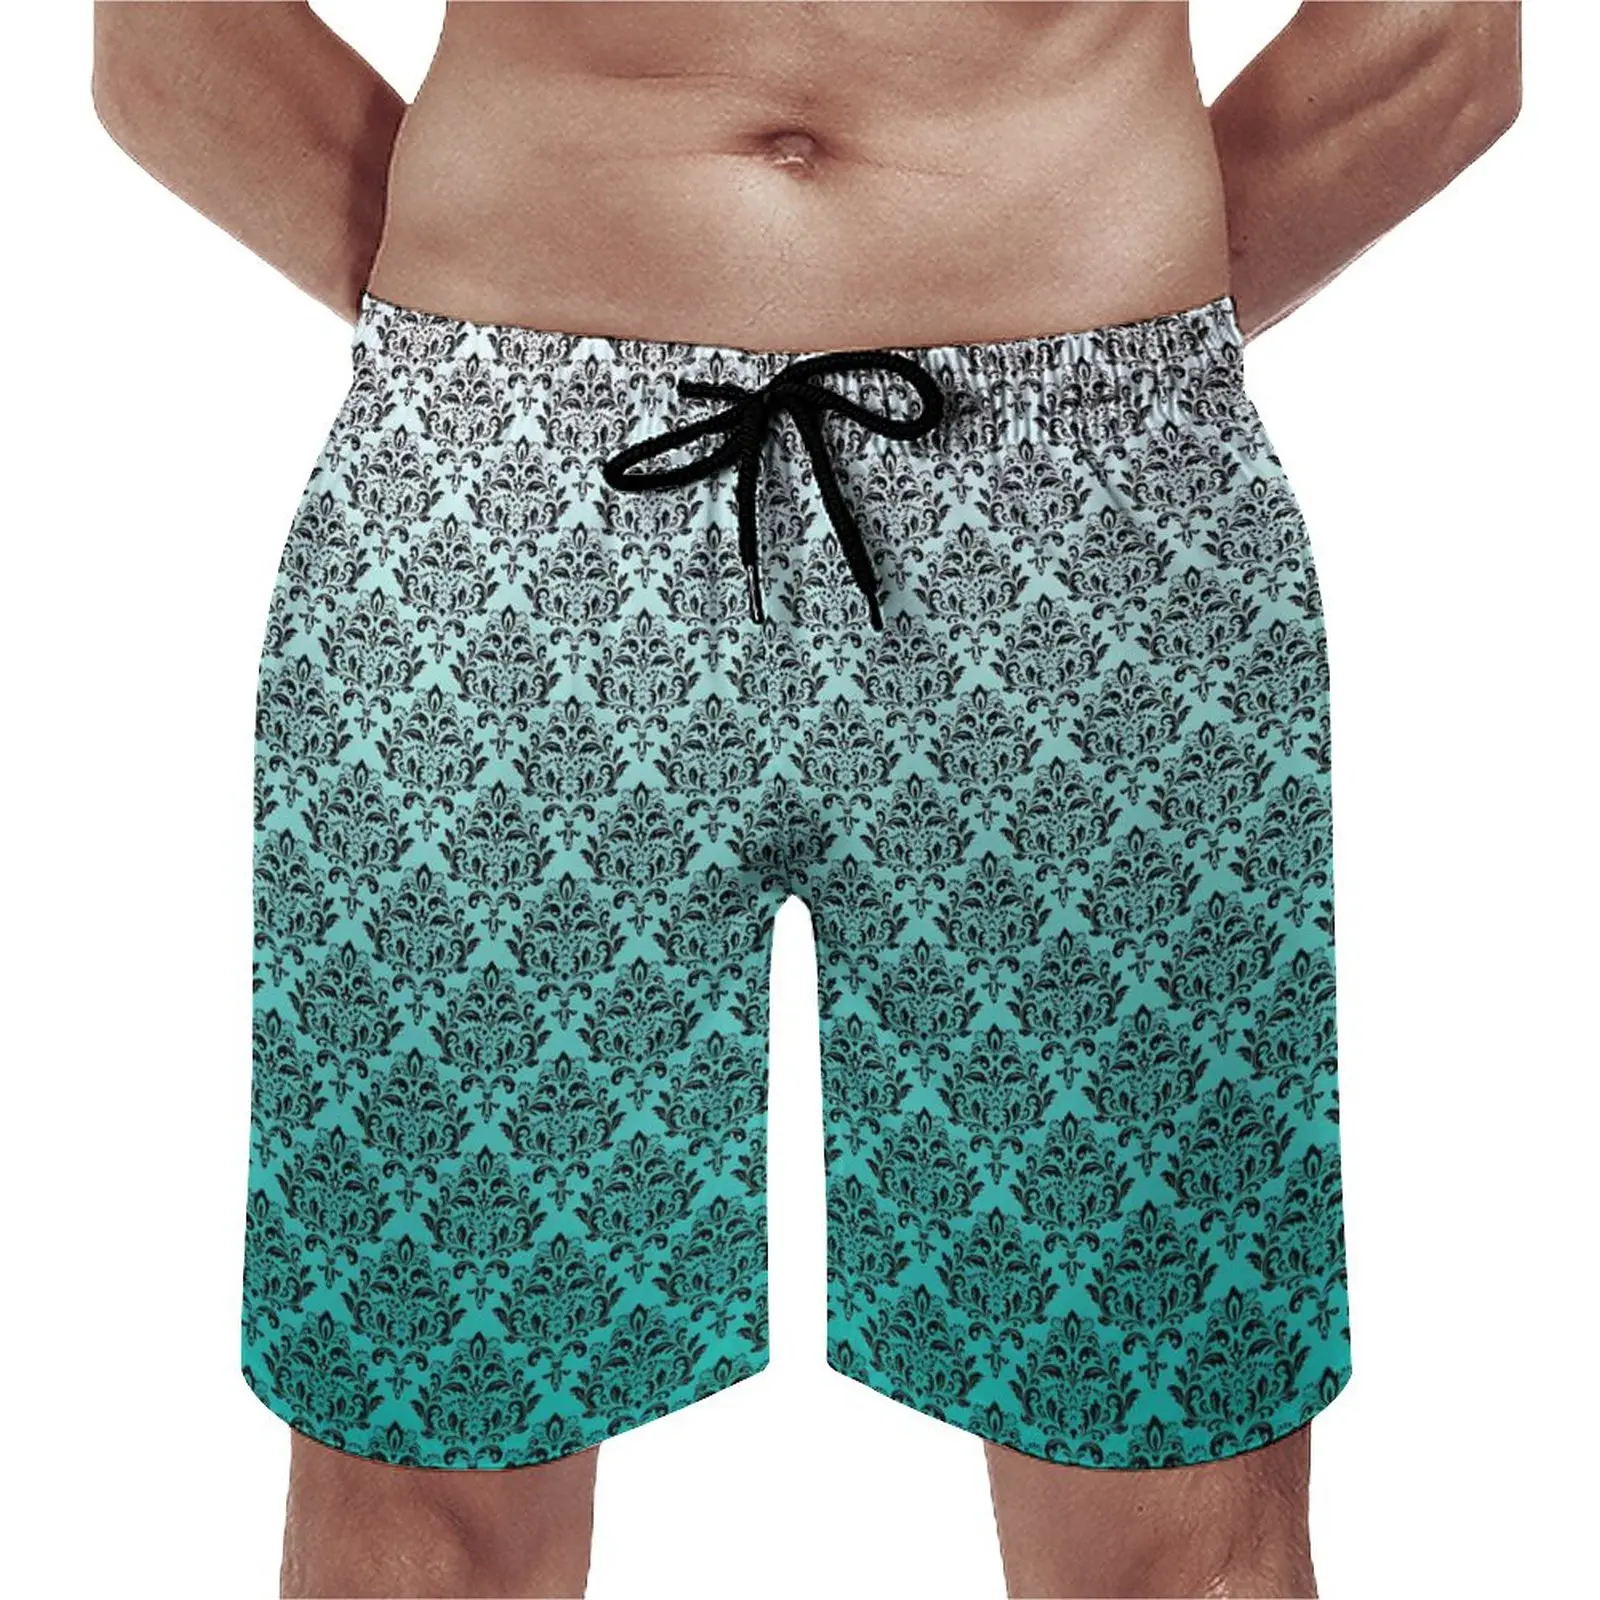 

Summer Board Shorts Black Damask Surfing Green Ombre Design Beach Shorts Hawaii Comfortable Swimming Trunks Large Size